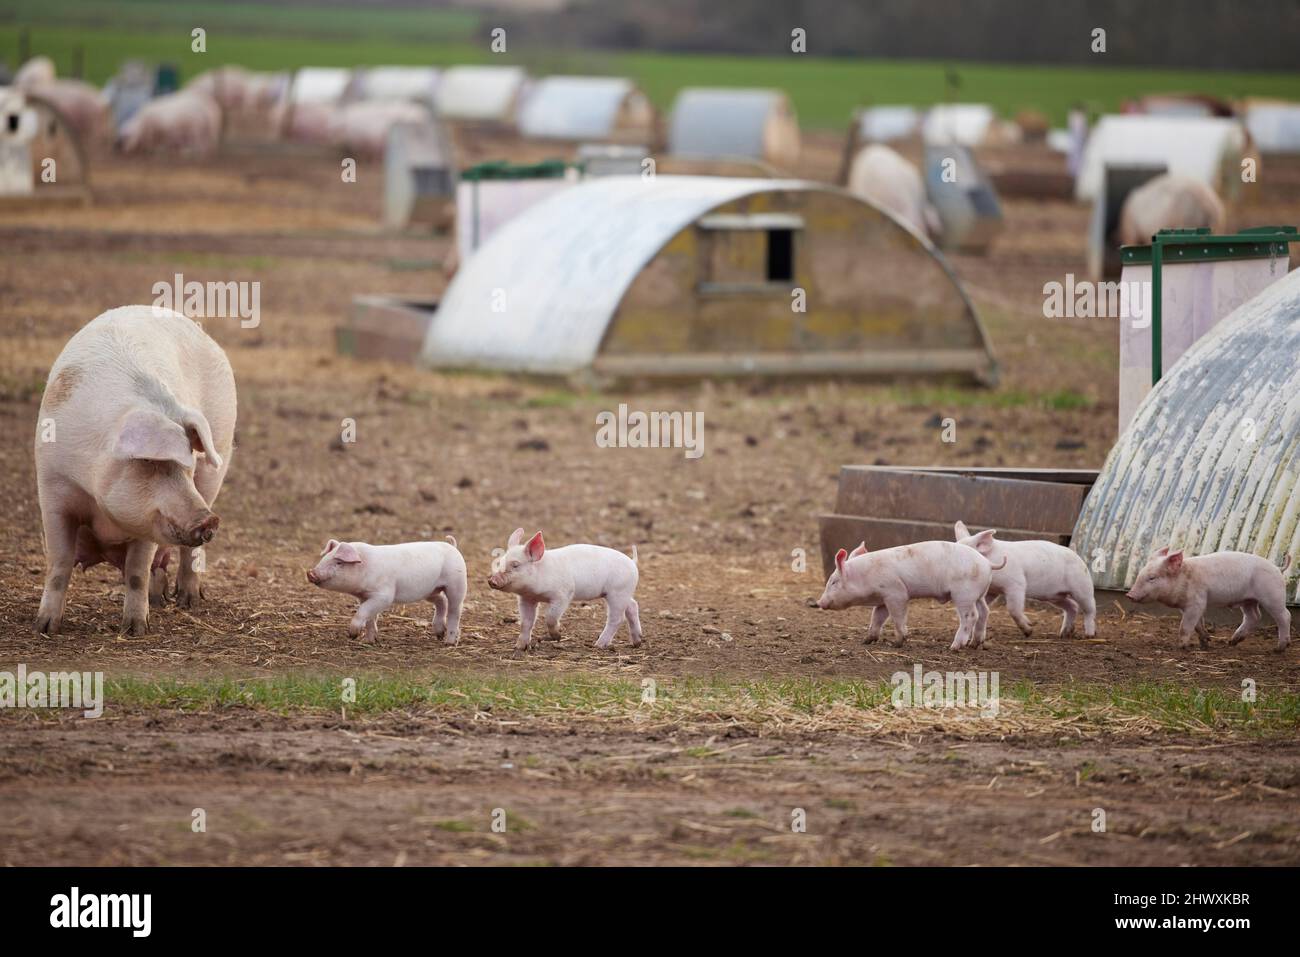 Female Pig With Baby Piglets Outdoors On Livestock Farm Stock Photo